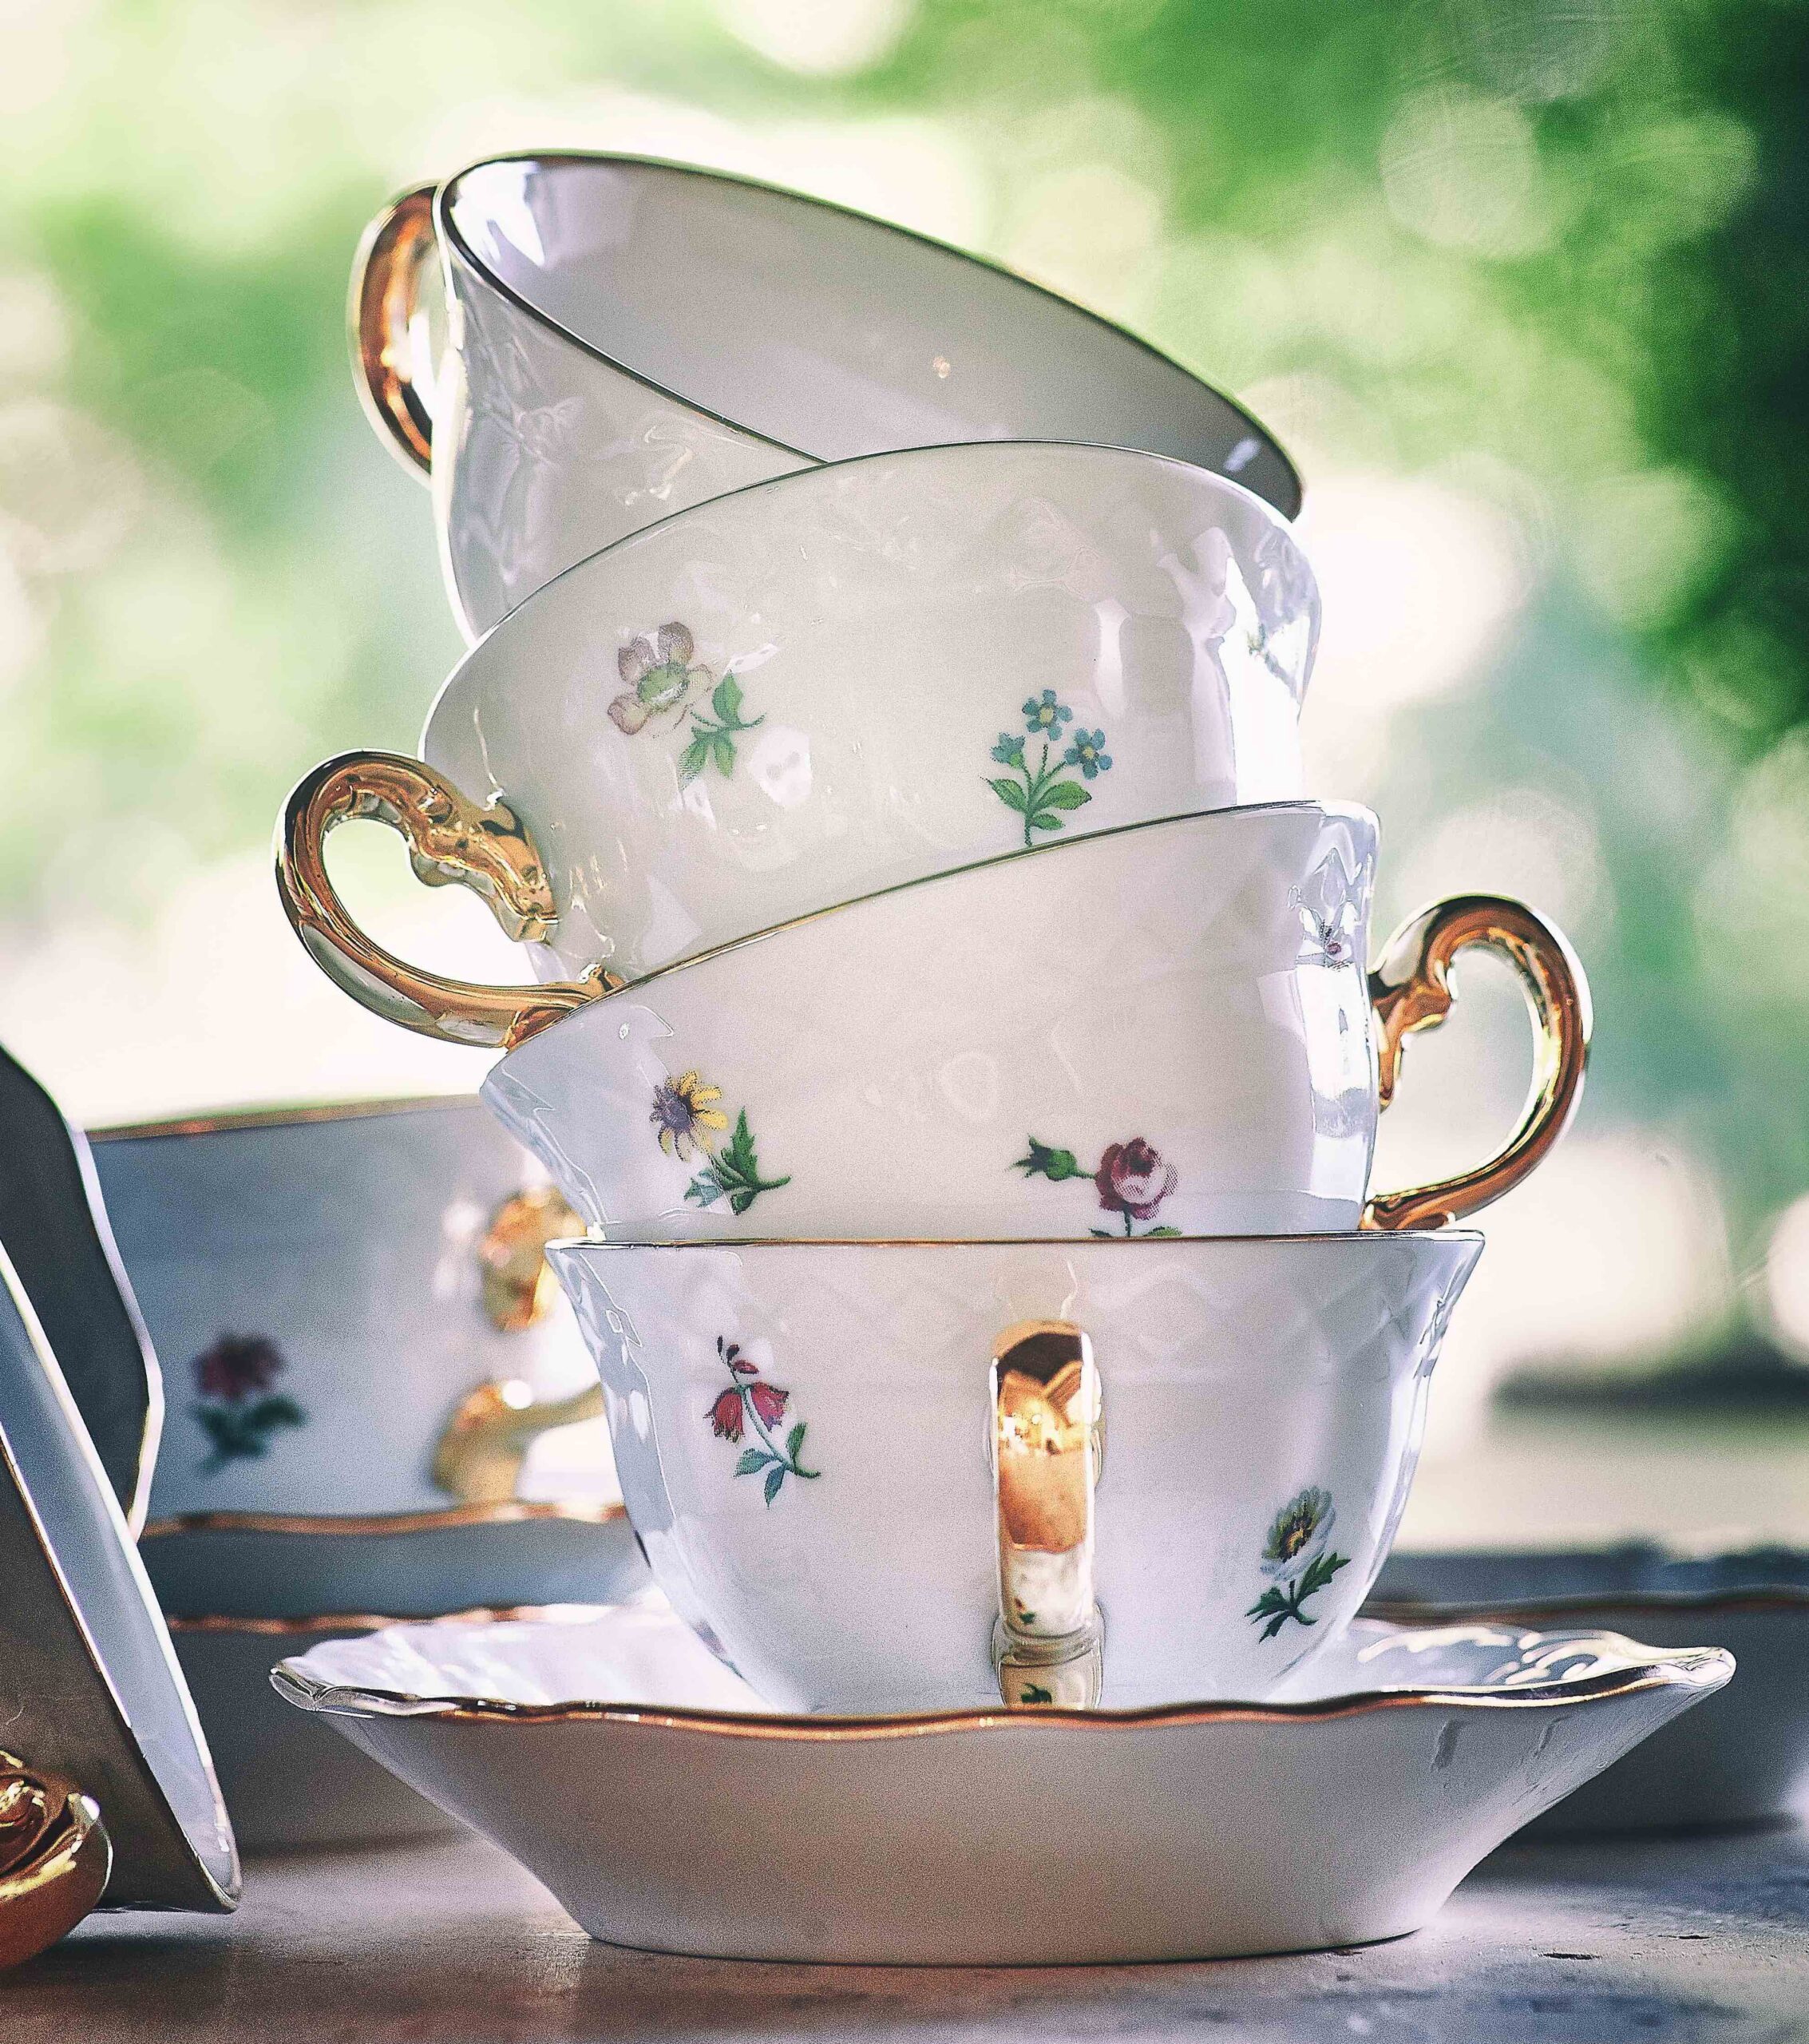 Junior League Lee County to Host Mad Hatter’s Tea Party